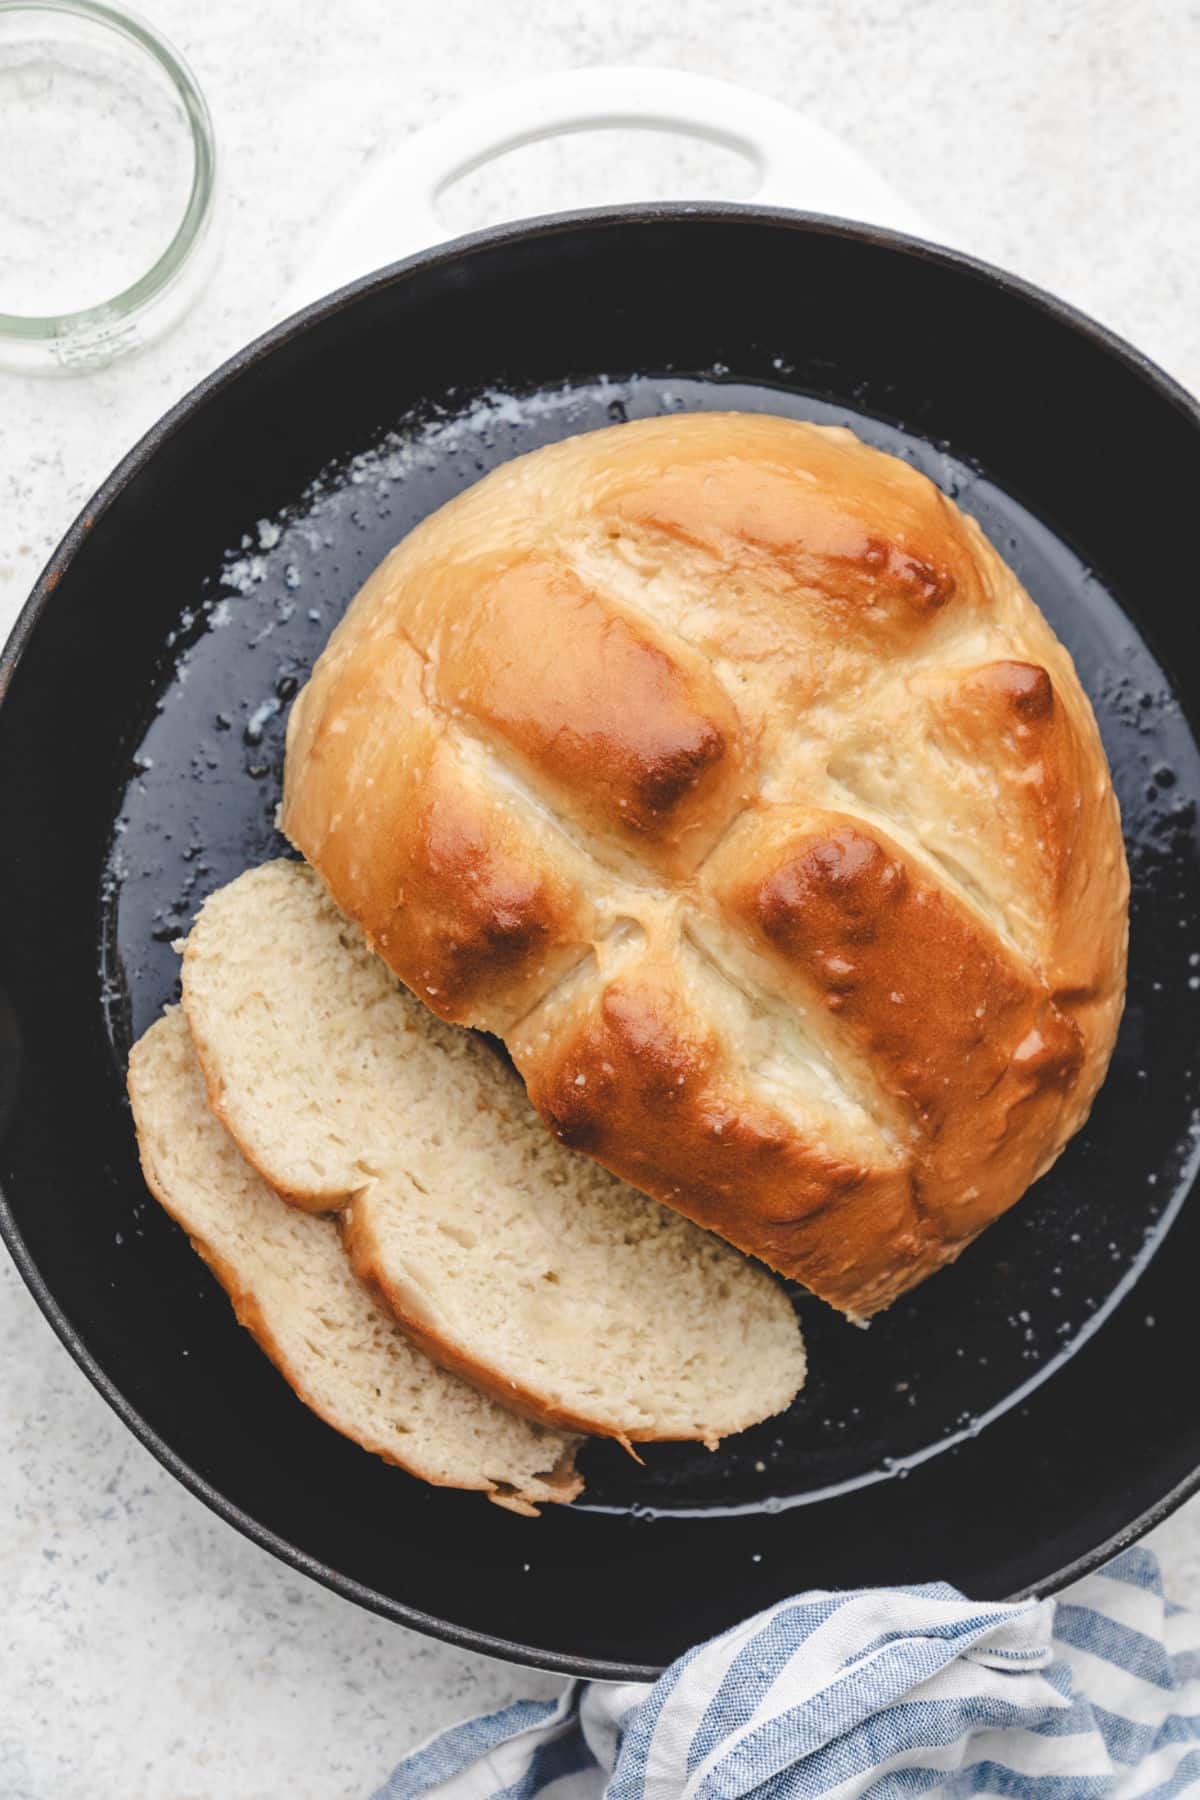 A loaf of skillet bread with two pieces sliced in a skillet.